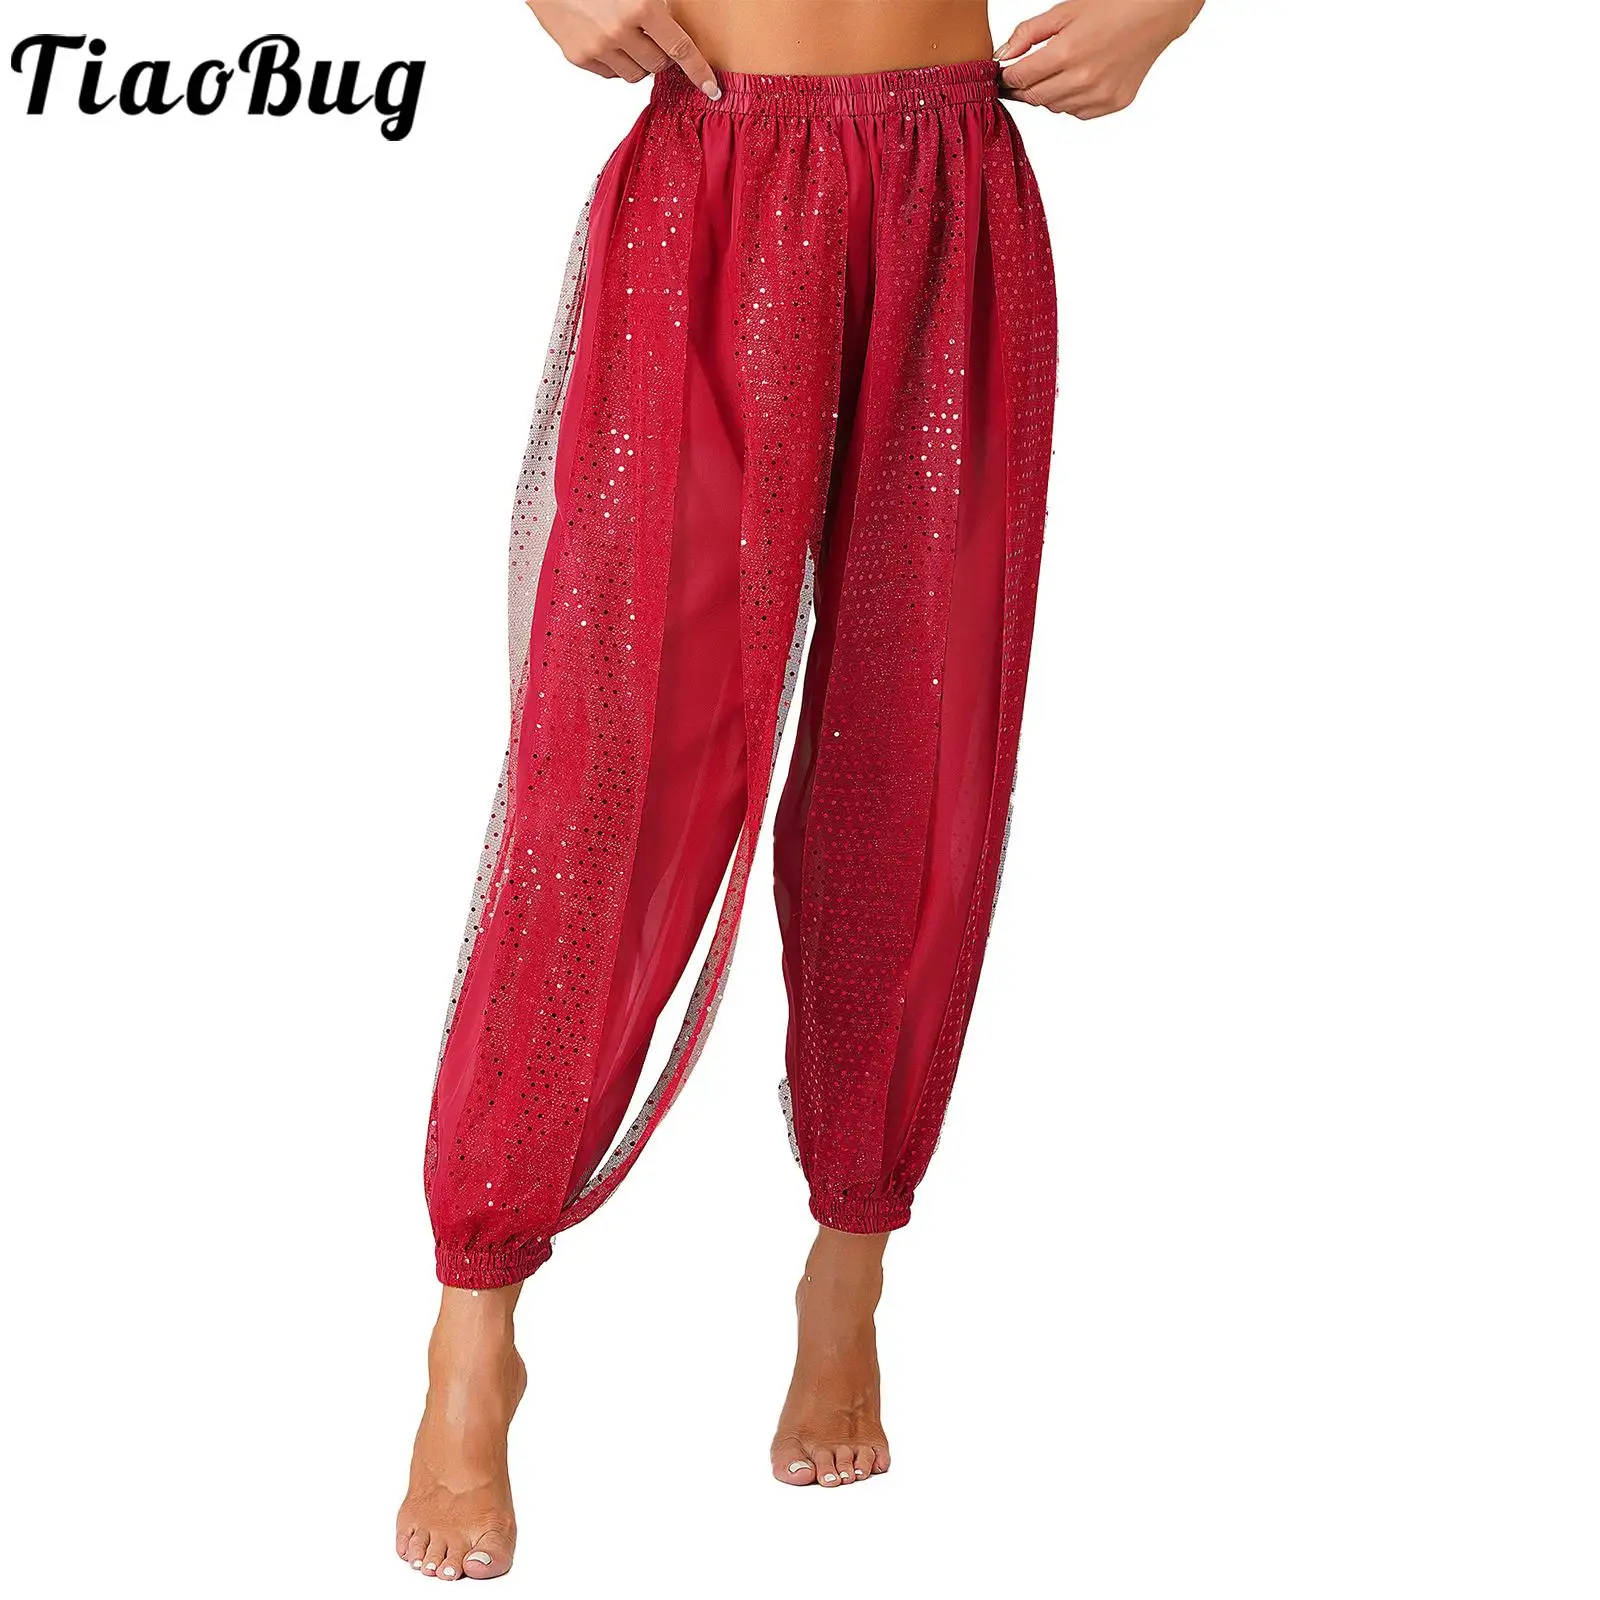 

Womens Belly Dance Pants Sequined Sheer Chiffon 、Stage Performance Trousers Elastic Waistband Semi See-Though Bloomers